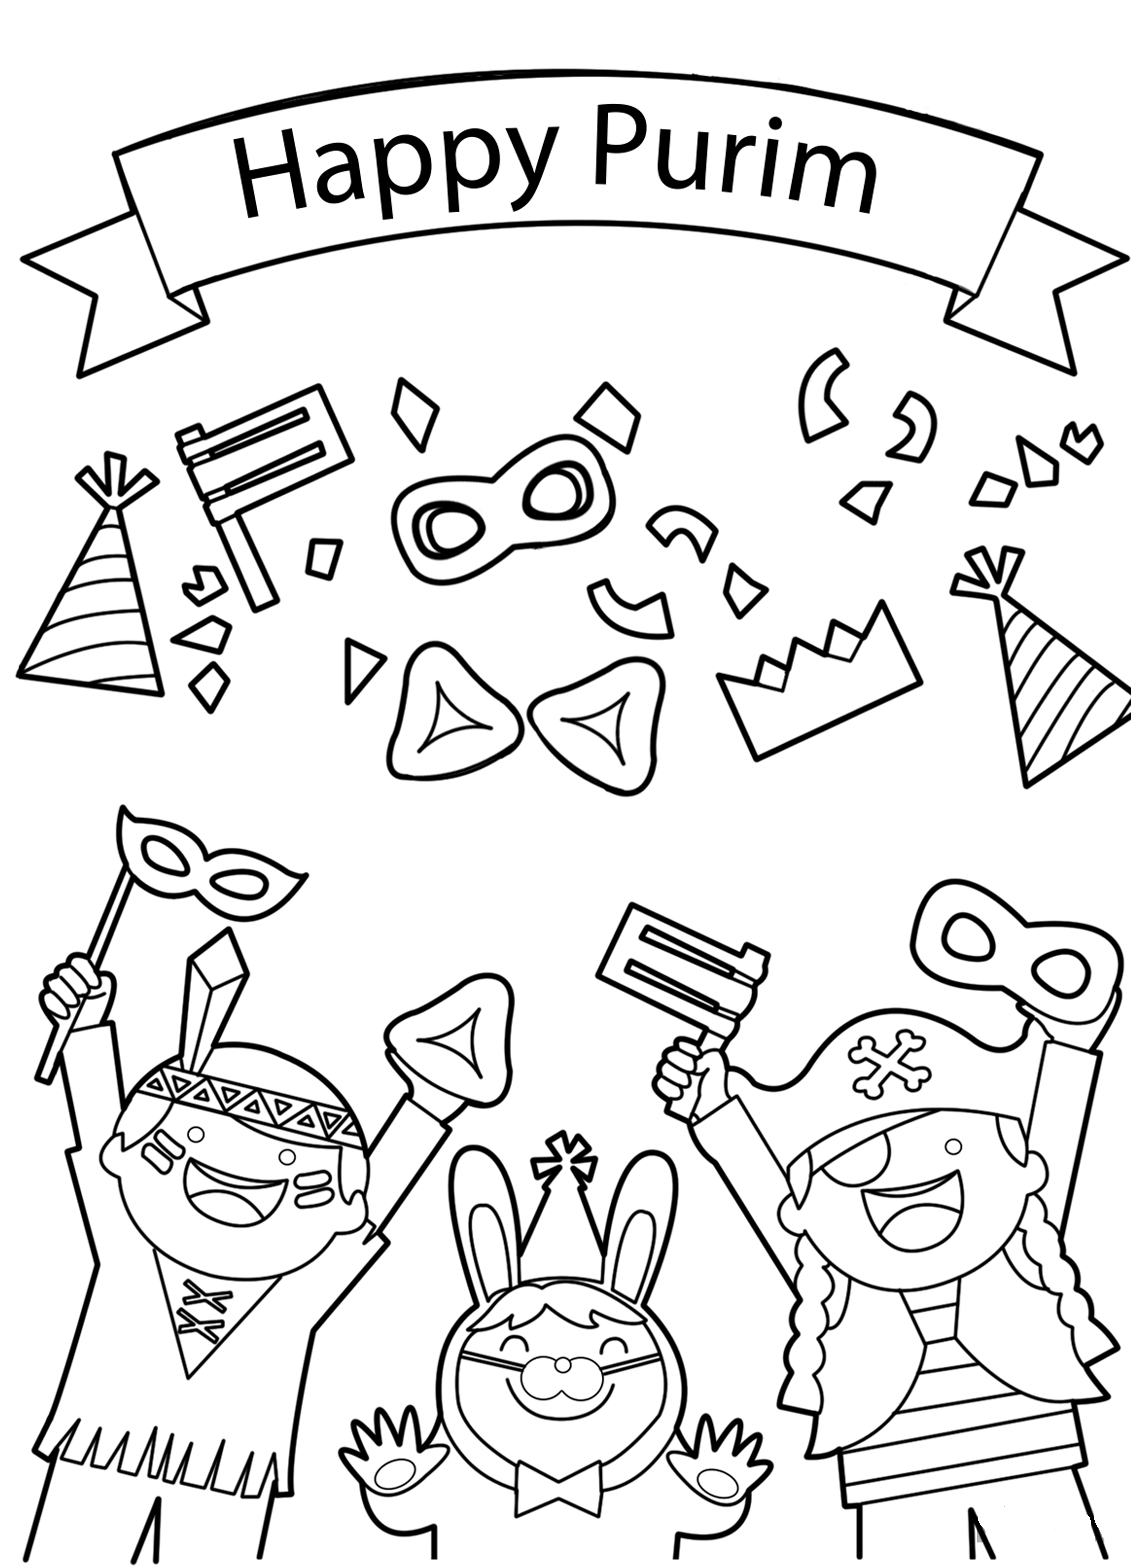 images of the purim story preschool coloring pages